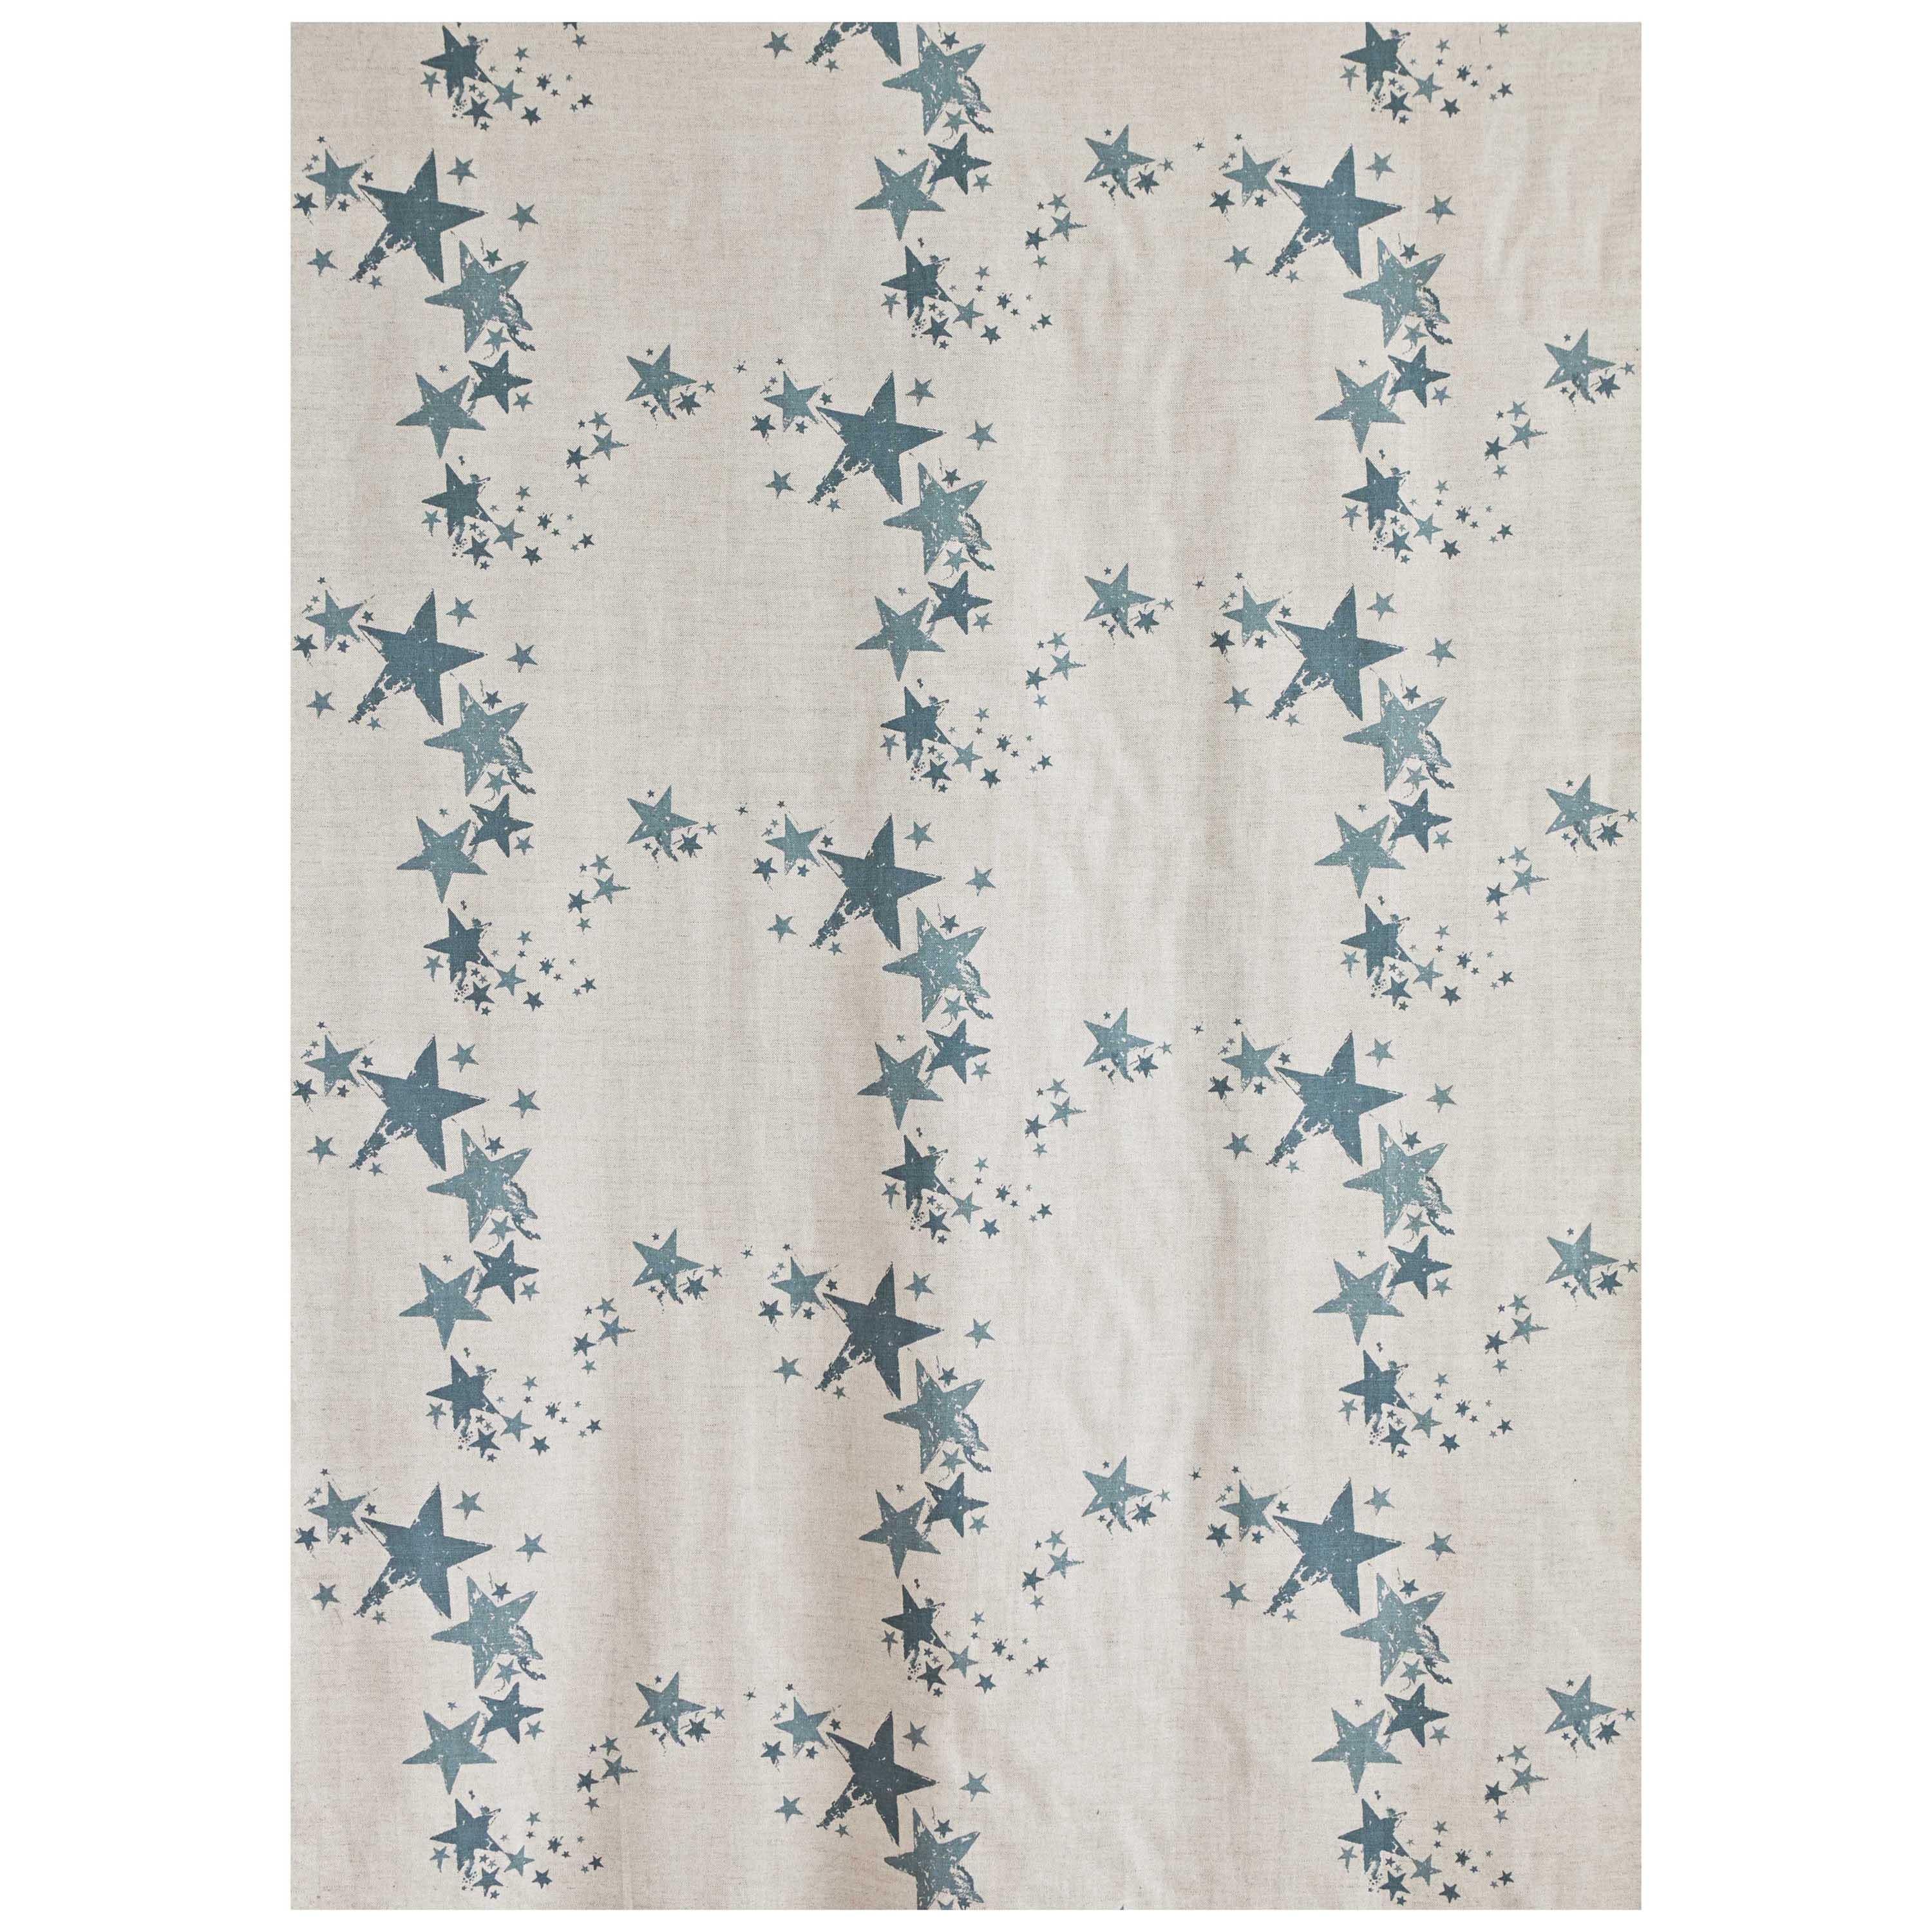 'All Star' Contemporary, Traditional Fabric in Gunmetal Blue For Sale